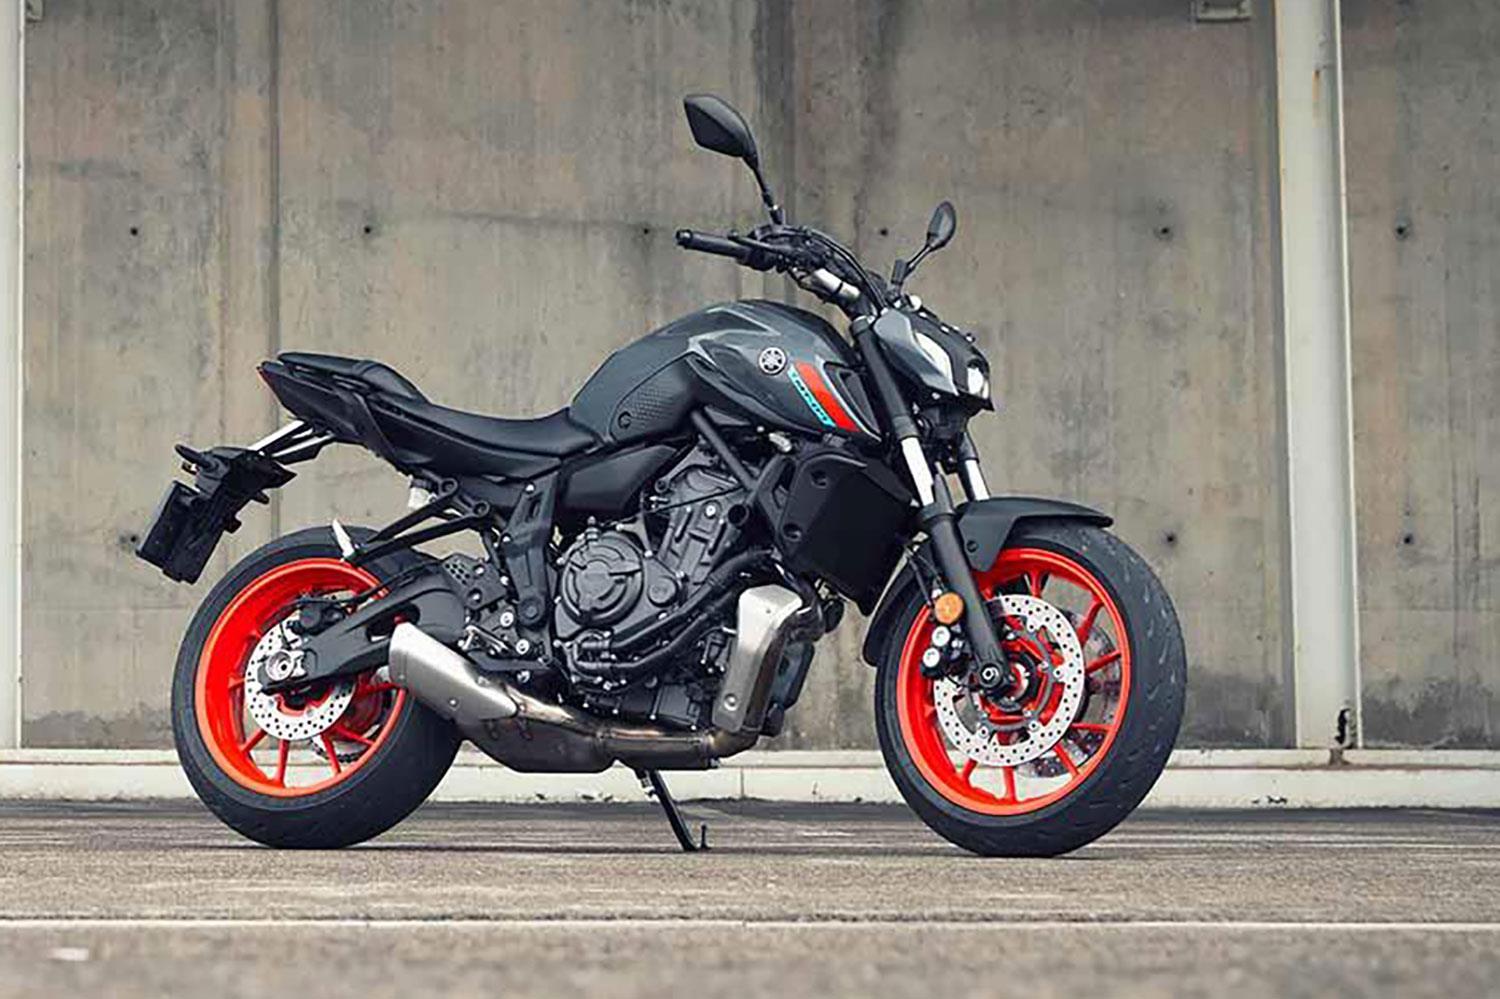 Yamaha Mt 07 21 On Review Mcn